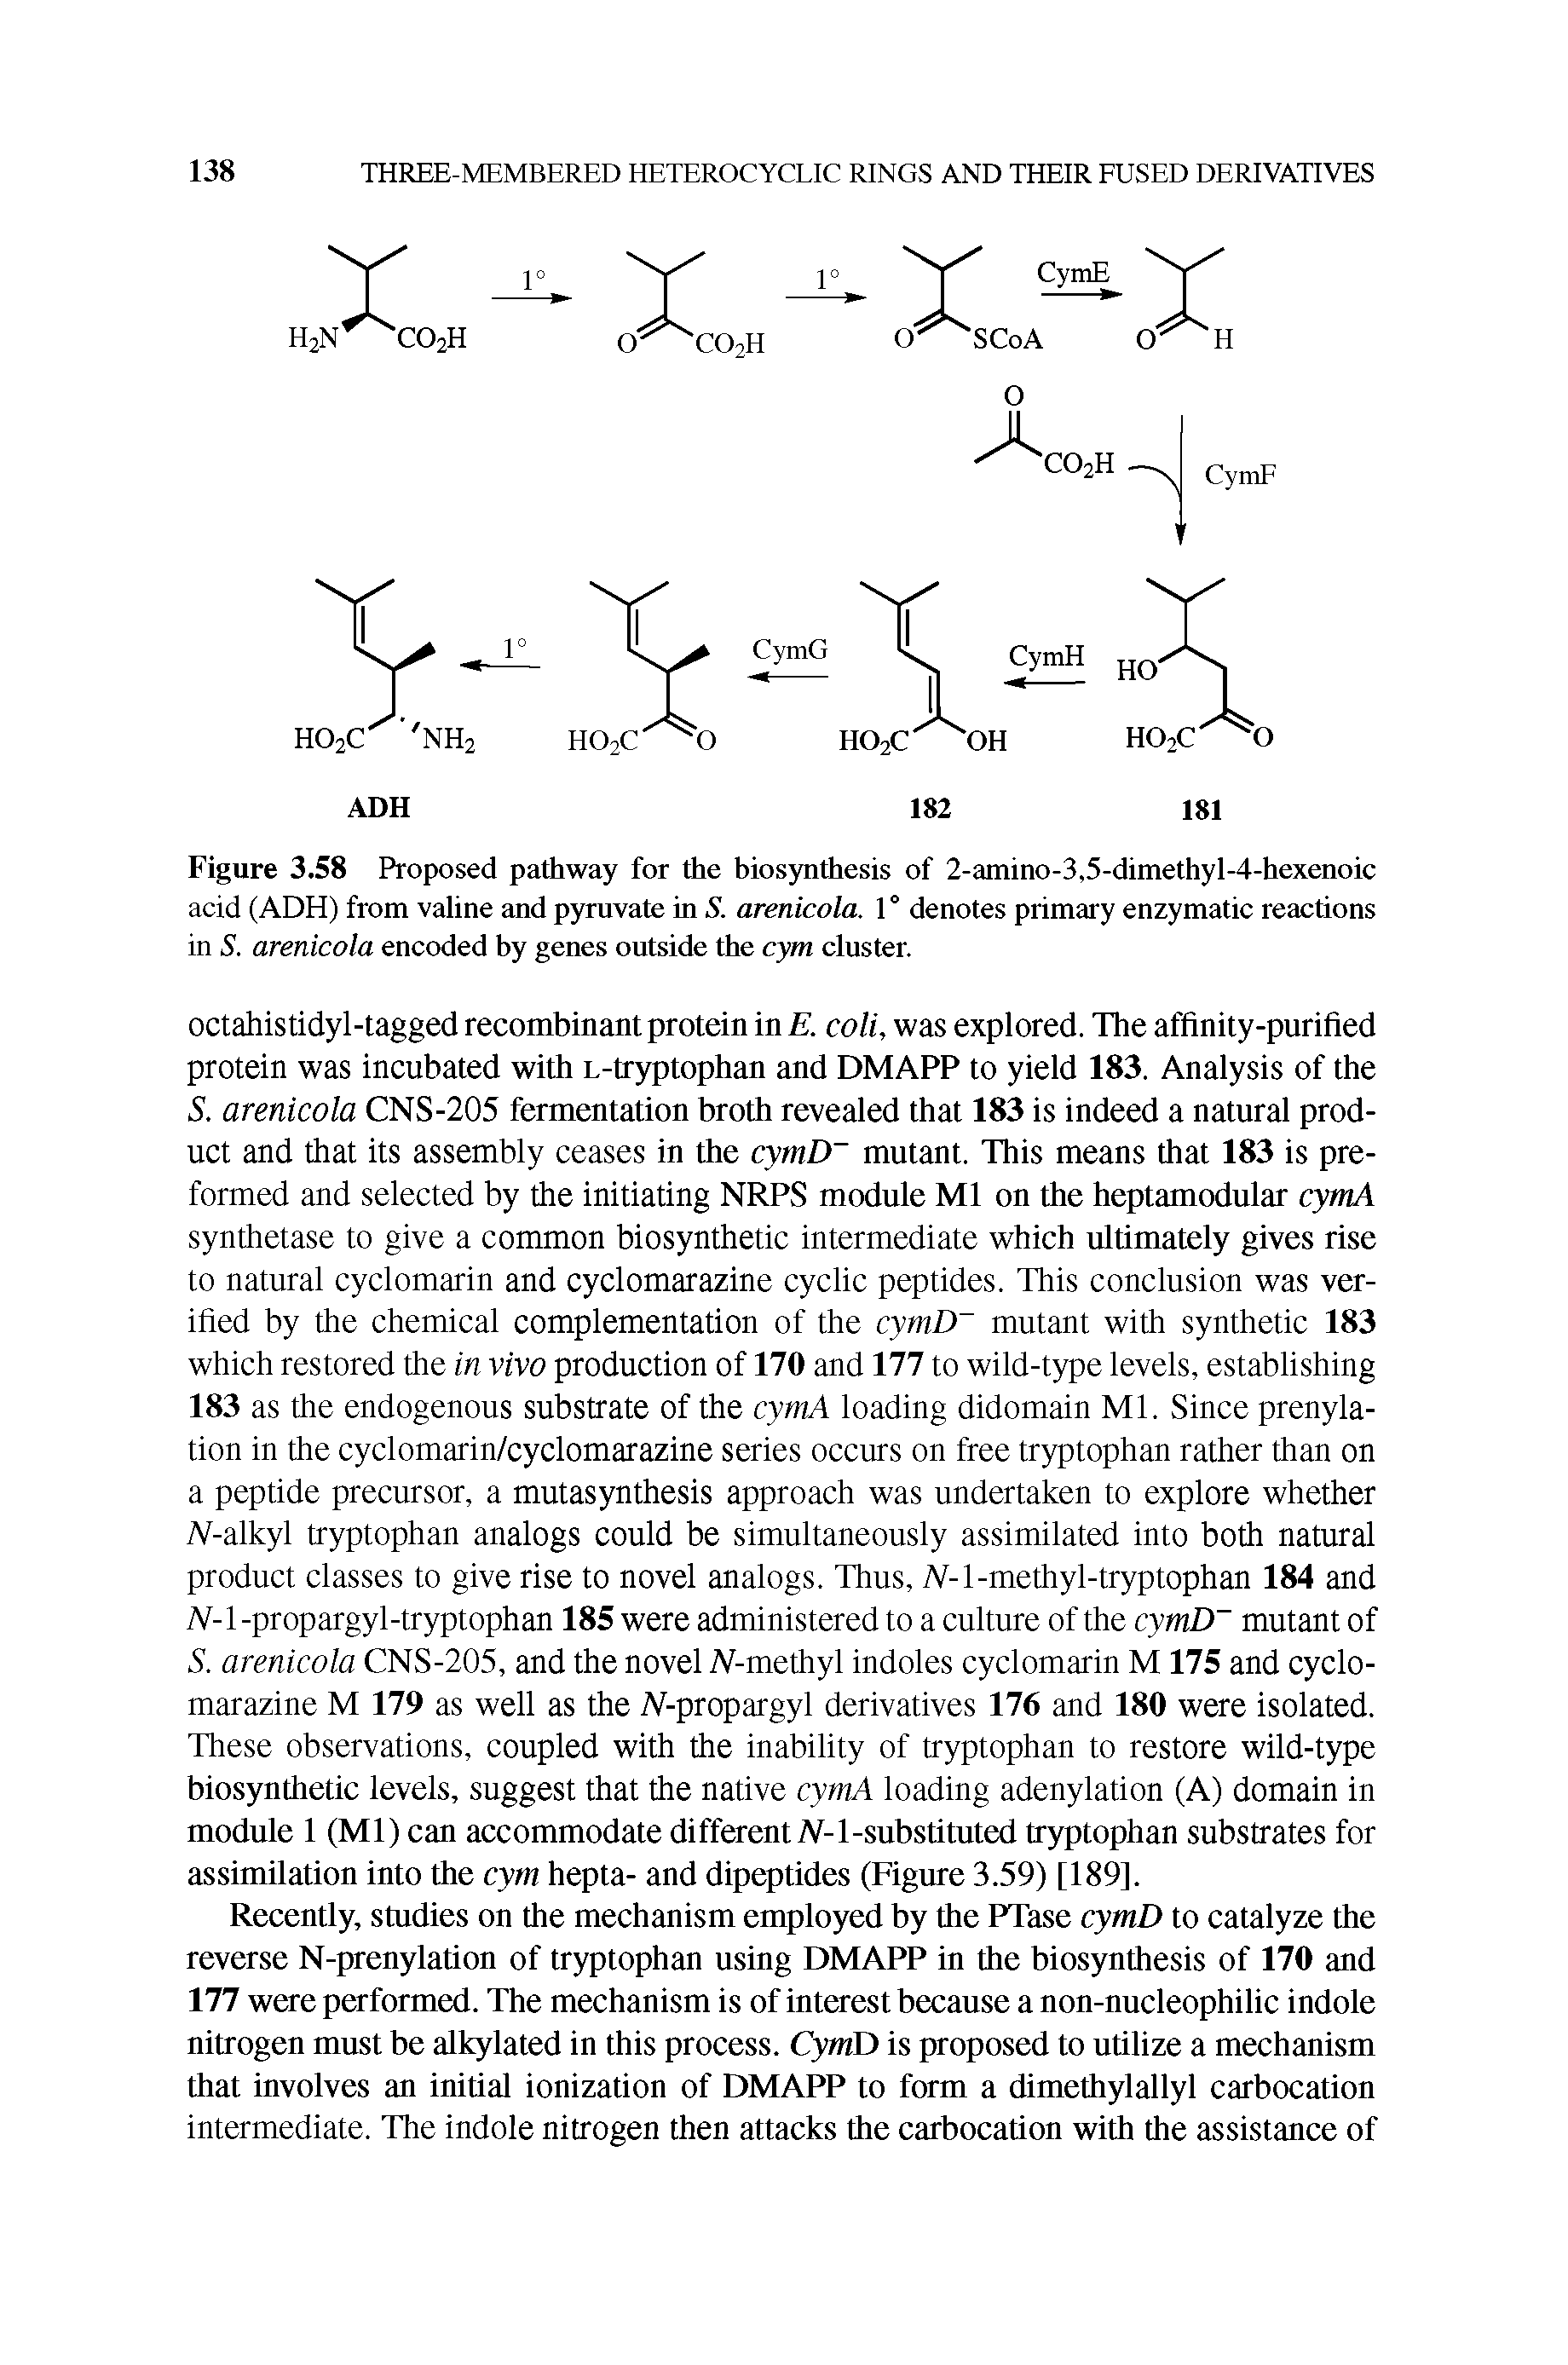 Figure 3.58 Proposed pathway for the biosynthesis of 2-amino-3,5-dimethyl-4-hexenoic acid (ADH) from valine and pyruvate in S. arenicola. 1° denotes primary enzymatic reactions in S. arenicola encoded by genes outside the cym cluster.